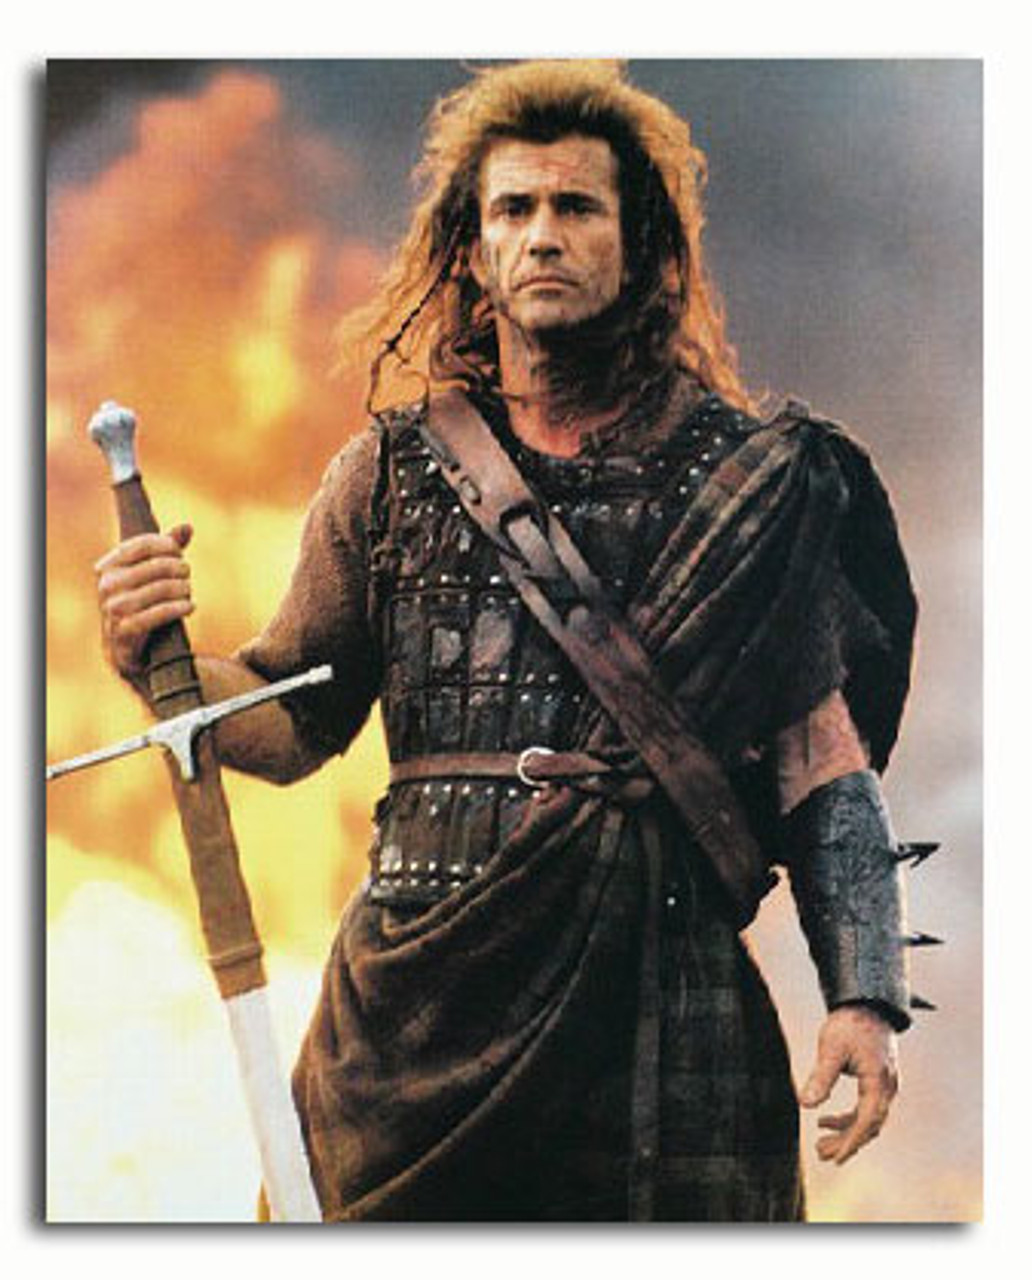 ss2795221_-_photograph_of_mel_gibson_as_william_wallace_from_braveheart_available_in_4_sizes_framed_or_unframed_buy_now_at_starstills__57017__83460.1394508932.jpg